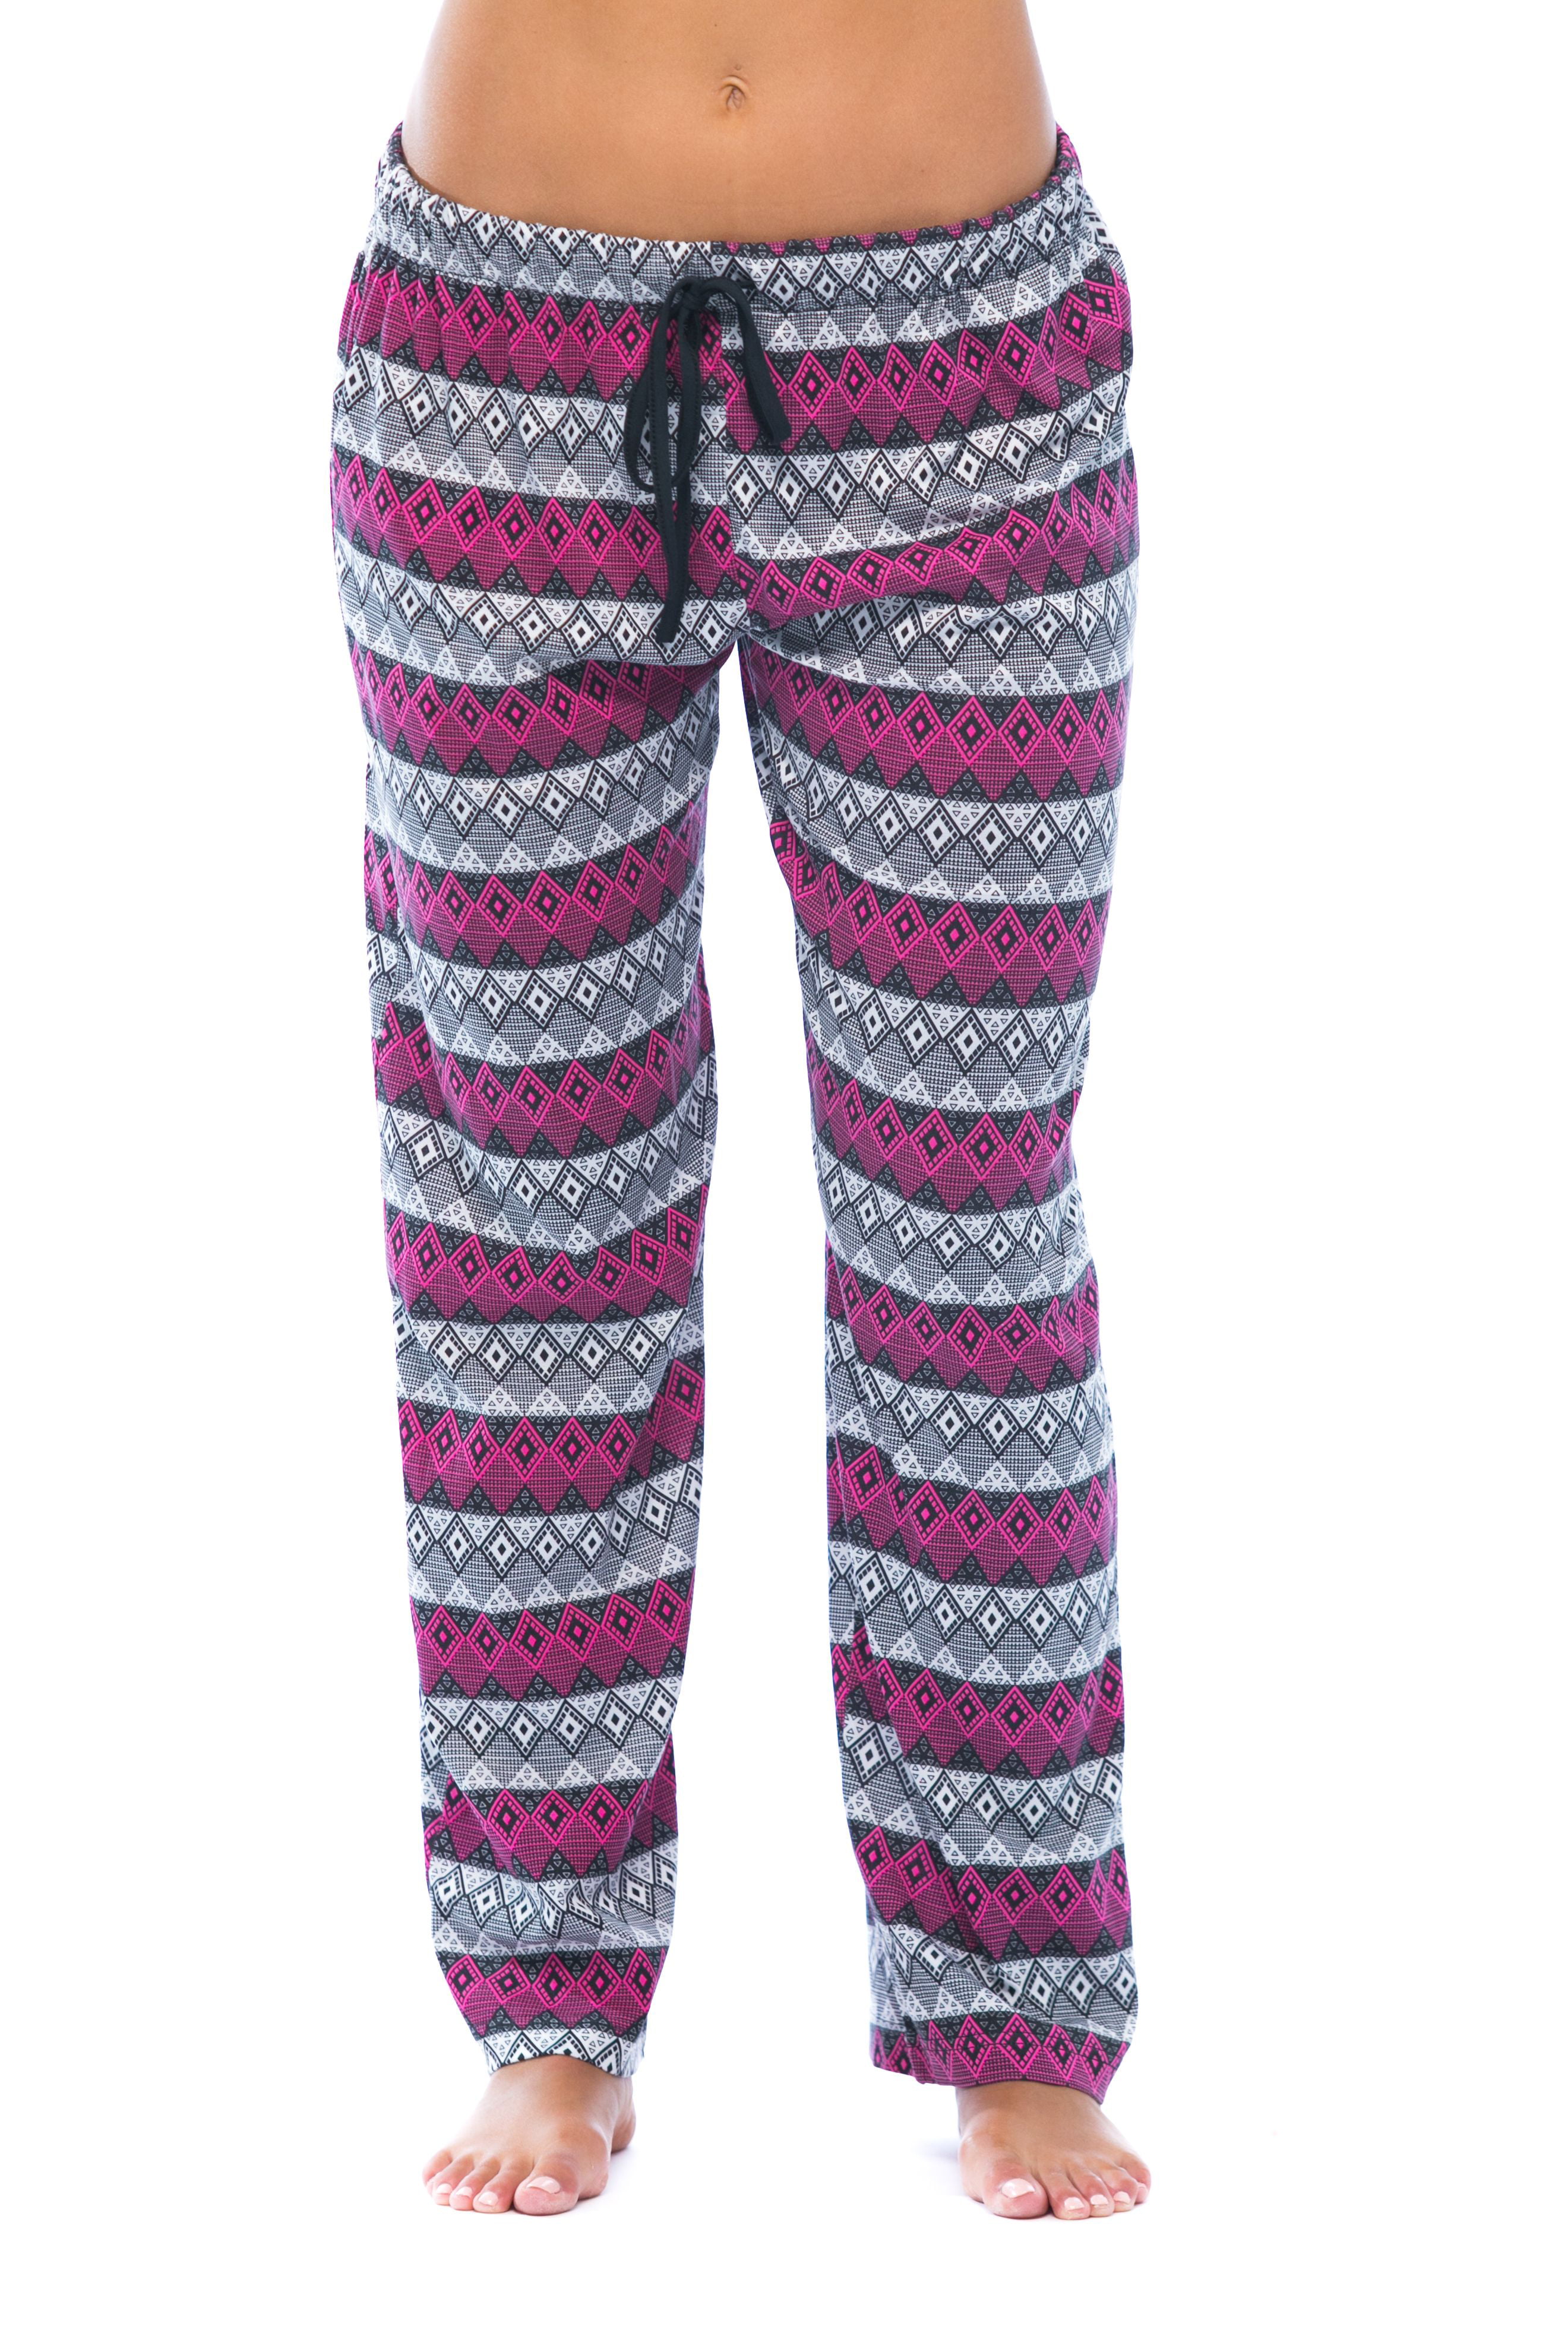 Just Love Silky Soft Women's Pajama Pants - Stretchy Sleepwear for a Great  Night's Rest (Pink With Black Dots, Small) 